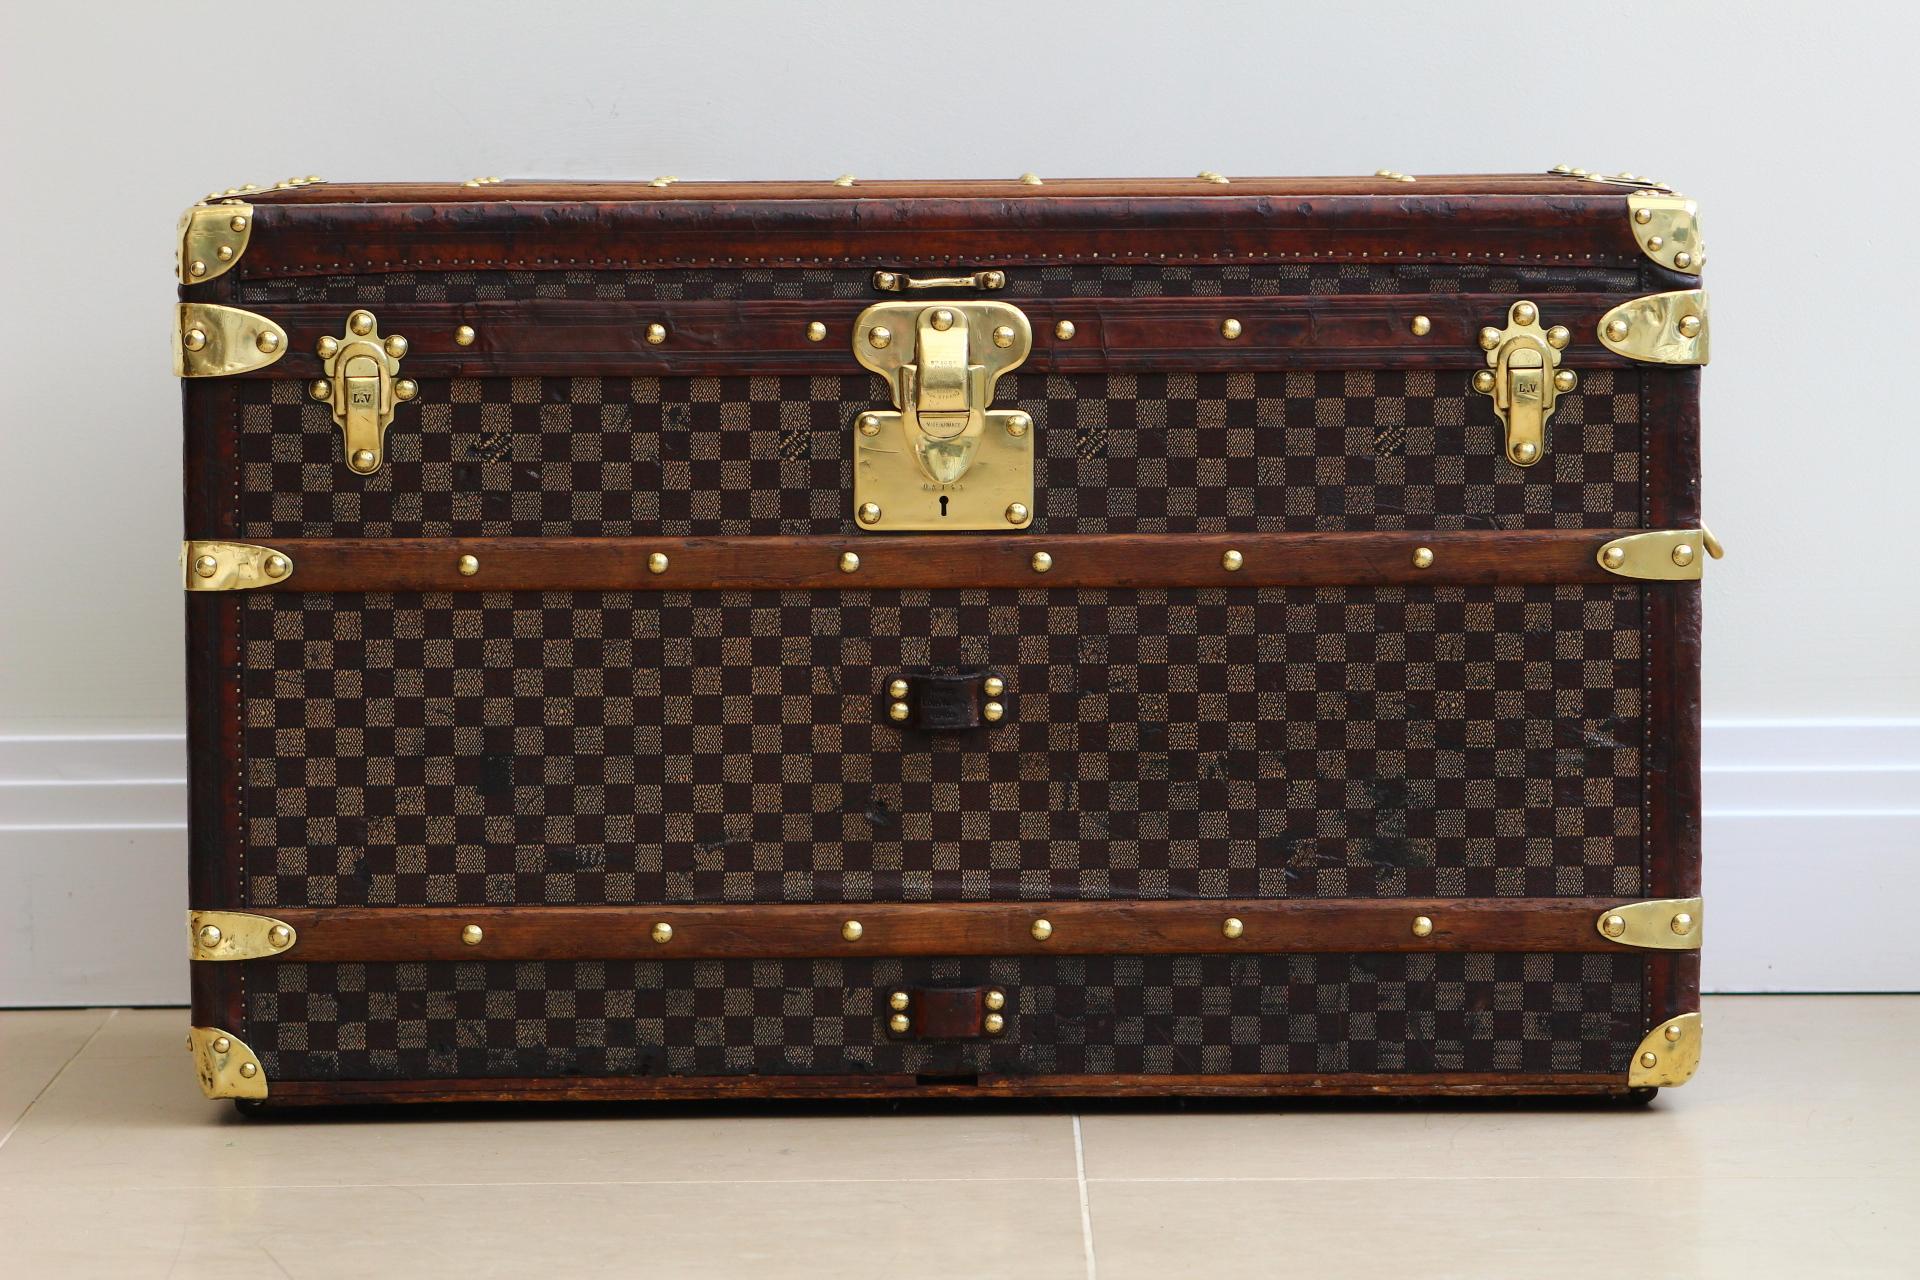 Louis Vuitton Courier Trunk, a testament to the lavish journey of luxury travel dating back to the 1880s. This exceptional piece is meticulously crafted in the iconic Damier canvas, a hallmark of Louis Vuitton's enduring style and elegance. The